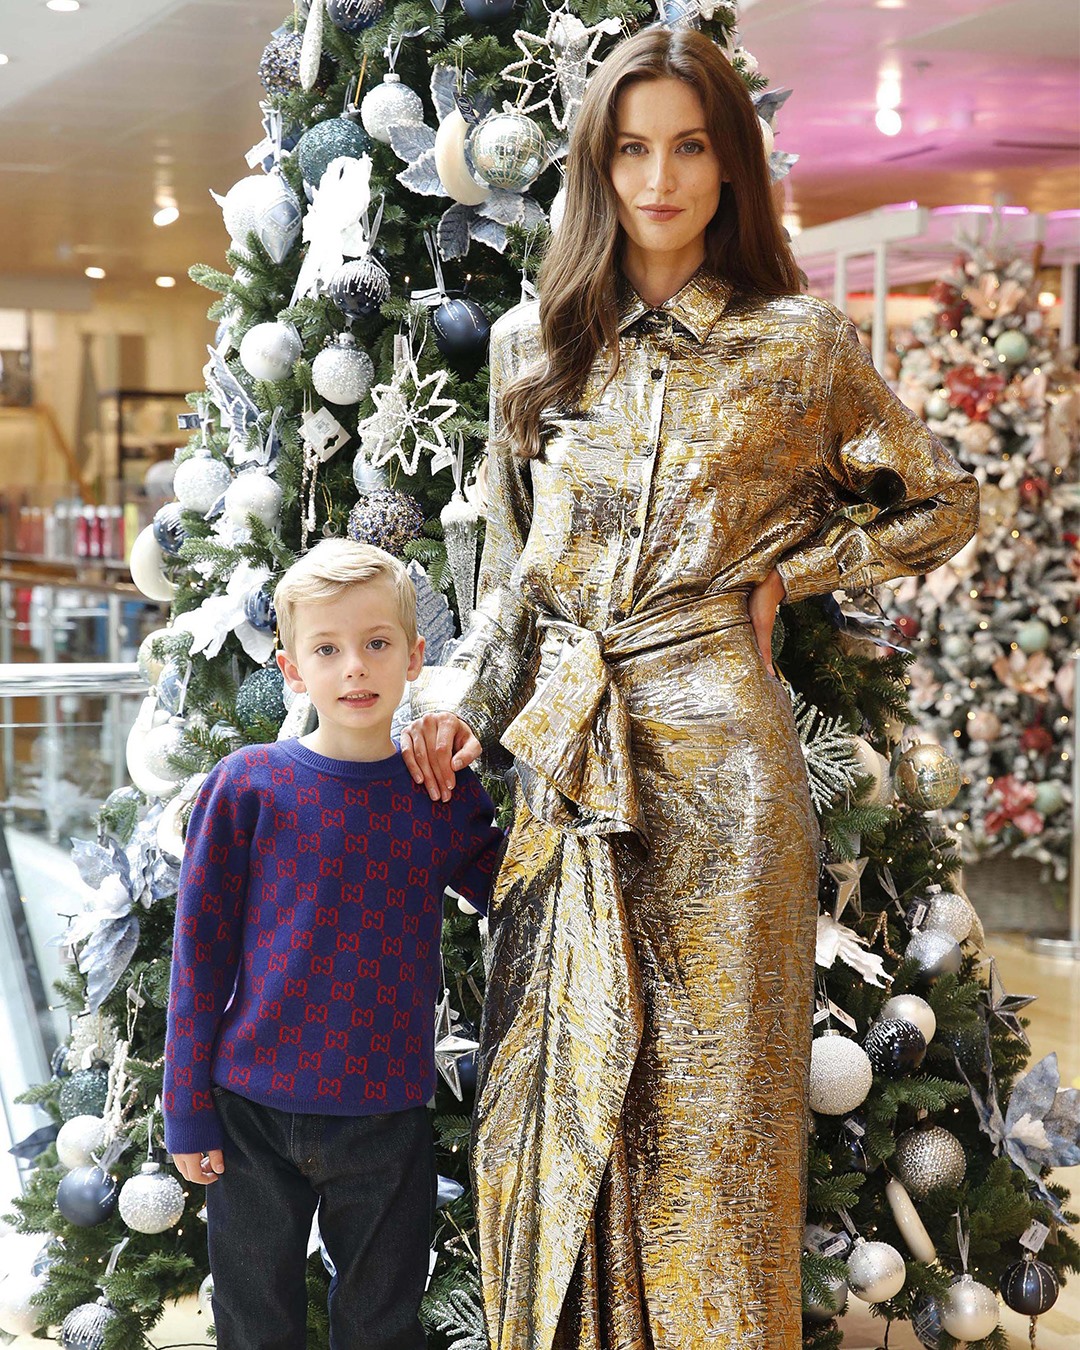 Less than 100 days to Christmas Day, Brown Thomas Christmas Shop is now open